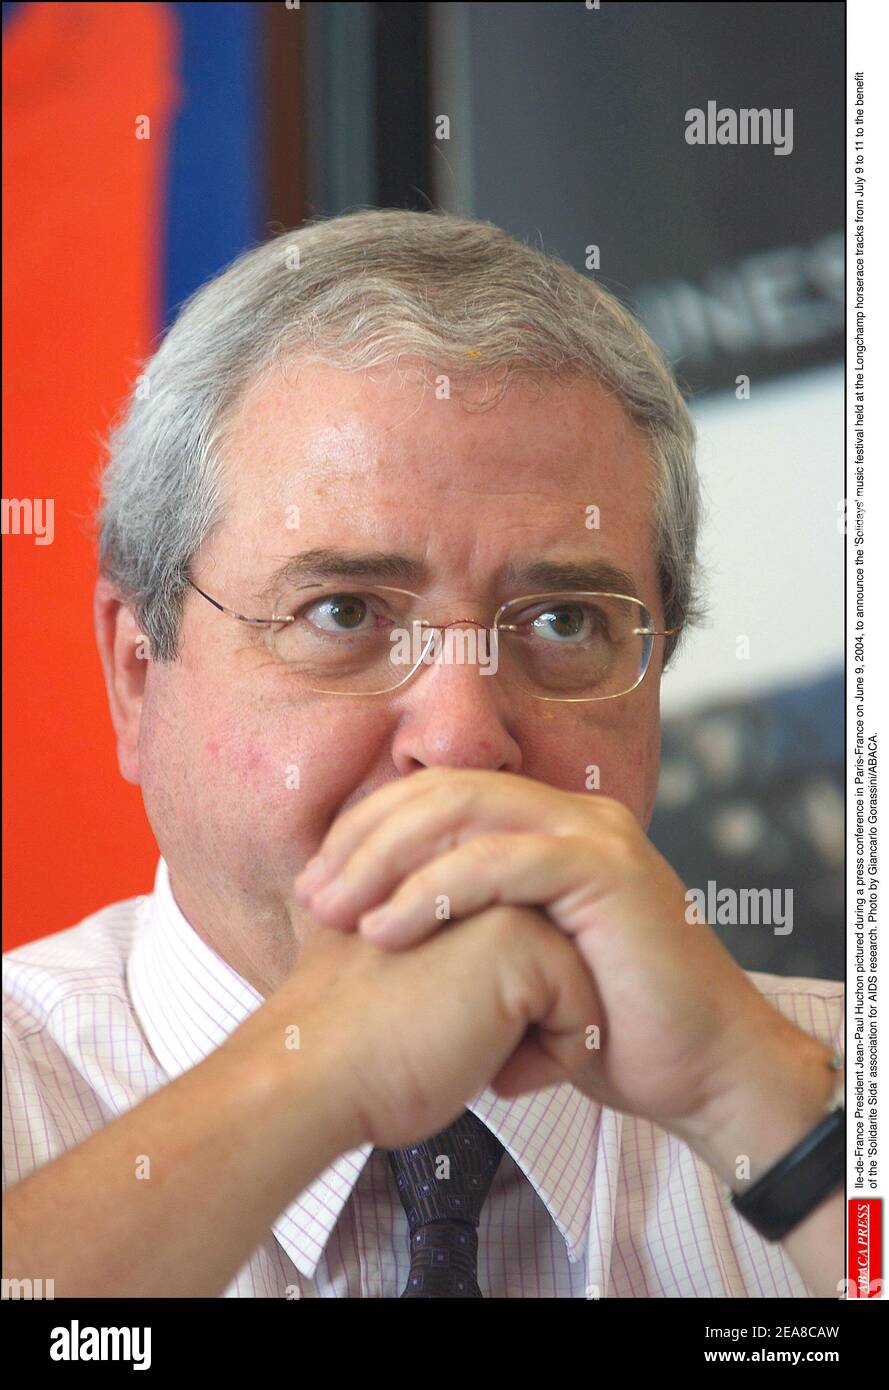 Ile-de-France President Jean-Paul Huchon pictured during a press conference  in Paris-France on June 9, 2004, to announce the 'Solidays' music festival  held at the Longchamp horserace tracks from July 9 to 11